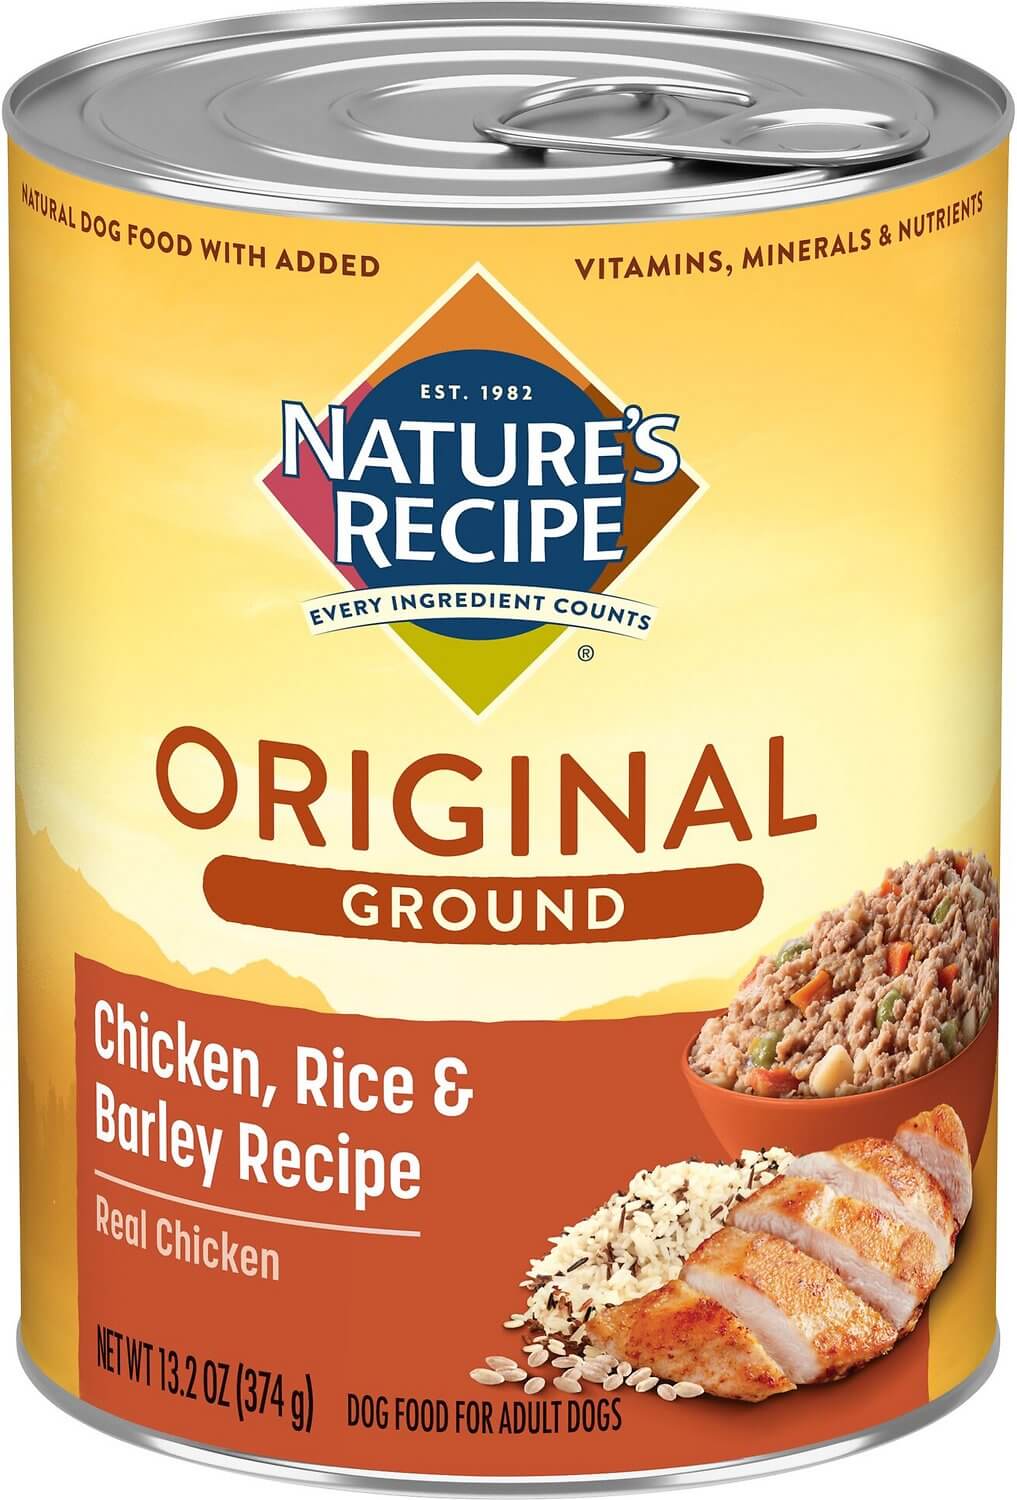 Nature’s Recipe Dog Food Review (Canned)